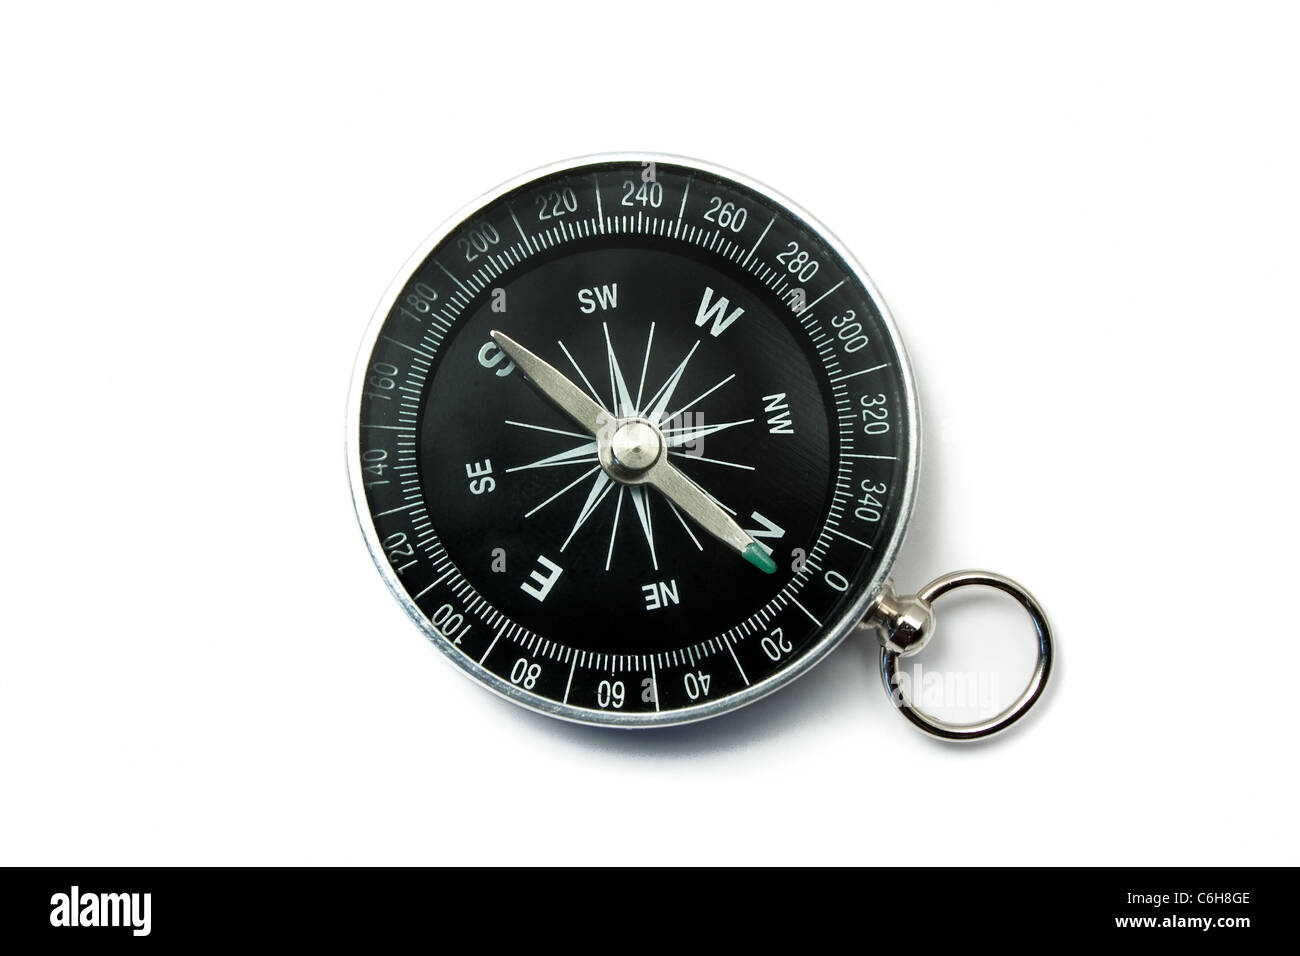 Compass Black with Green Symbols on Dial Isolated on White Backround Stock Photo